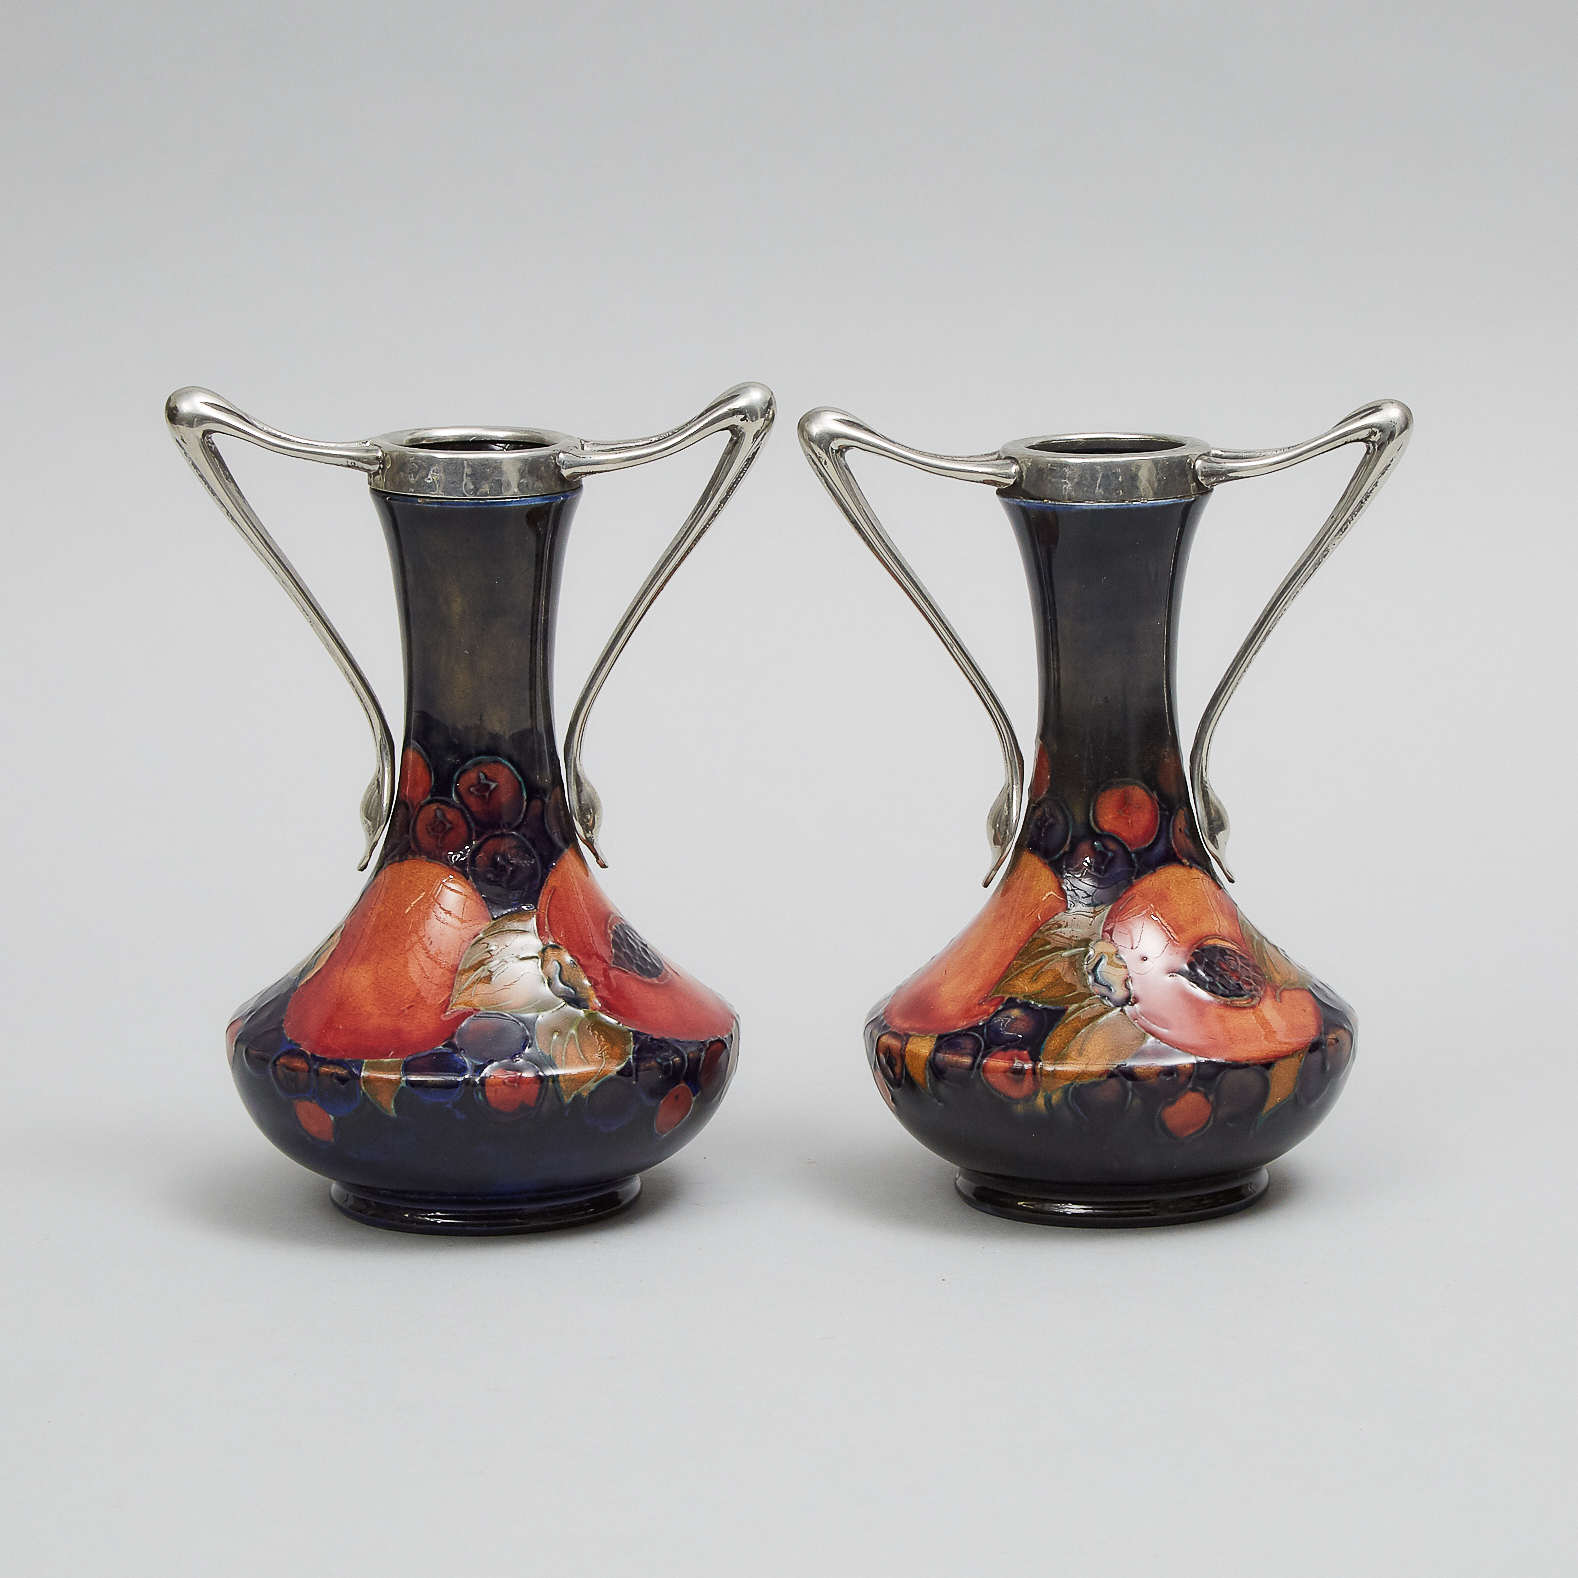 Pair of Moorcroft Pewter Mounted Two-Handled Pomegranate Vases, c.1925